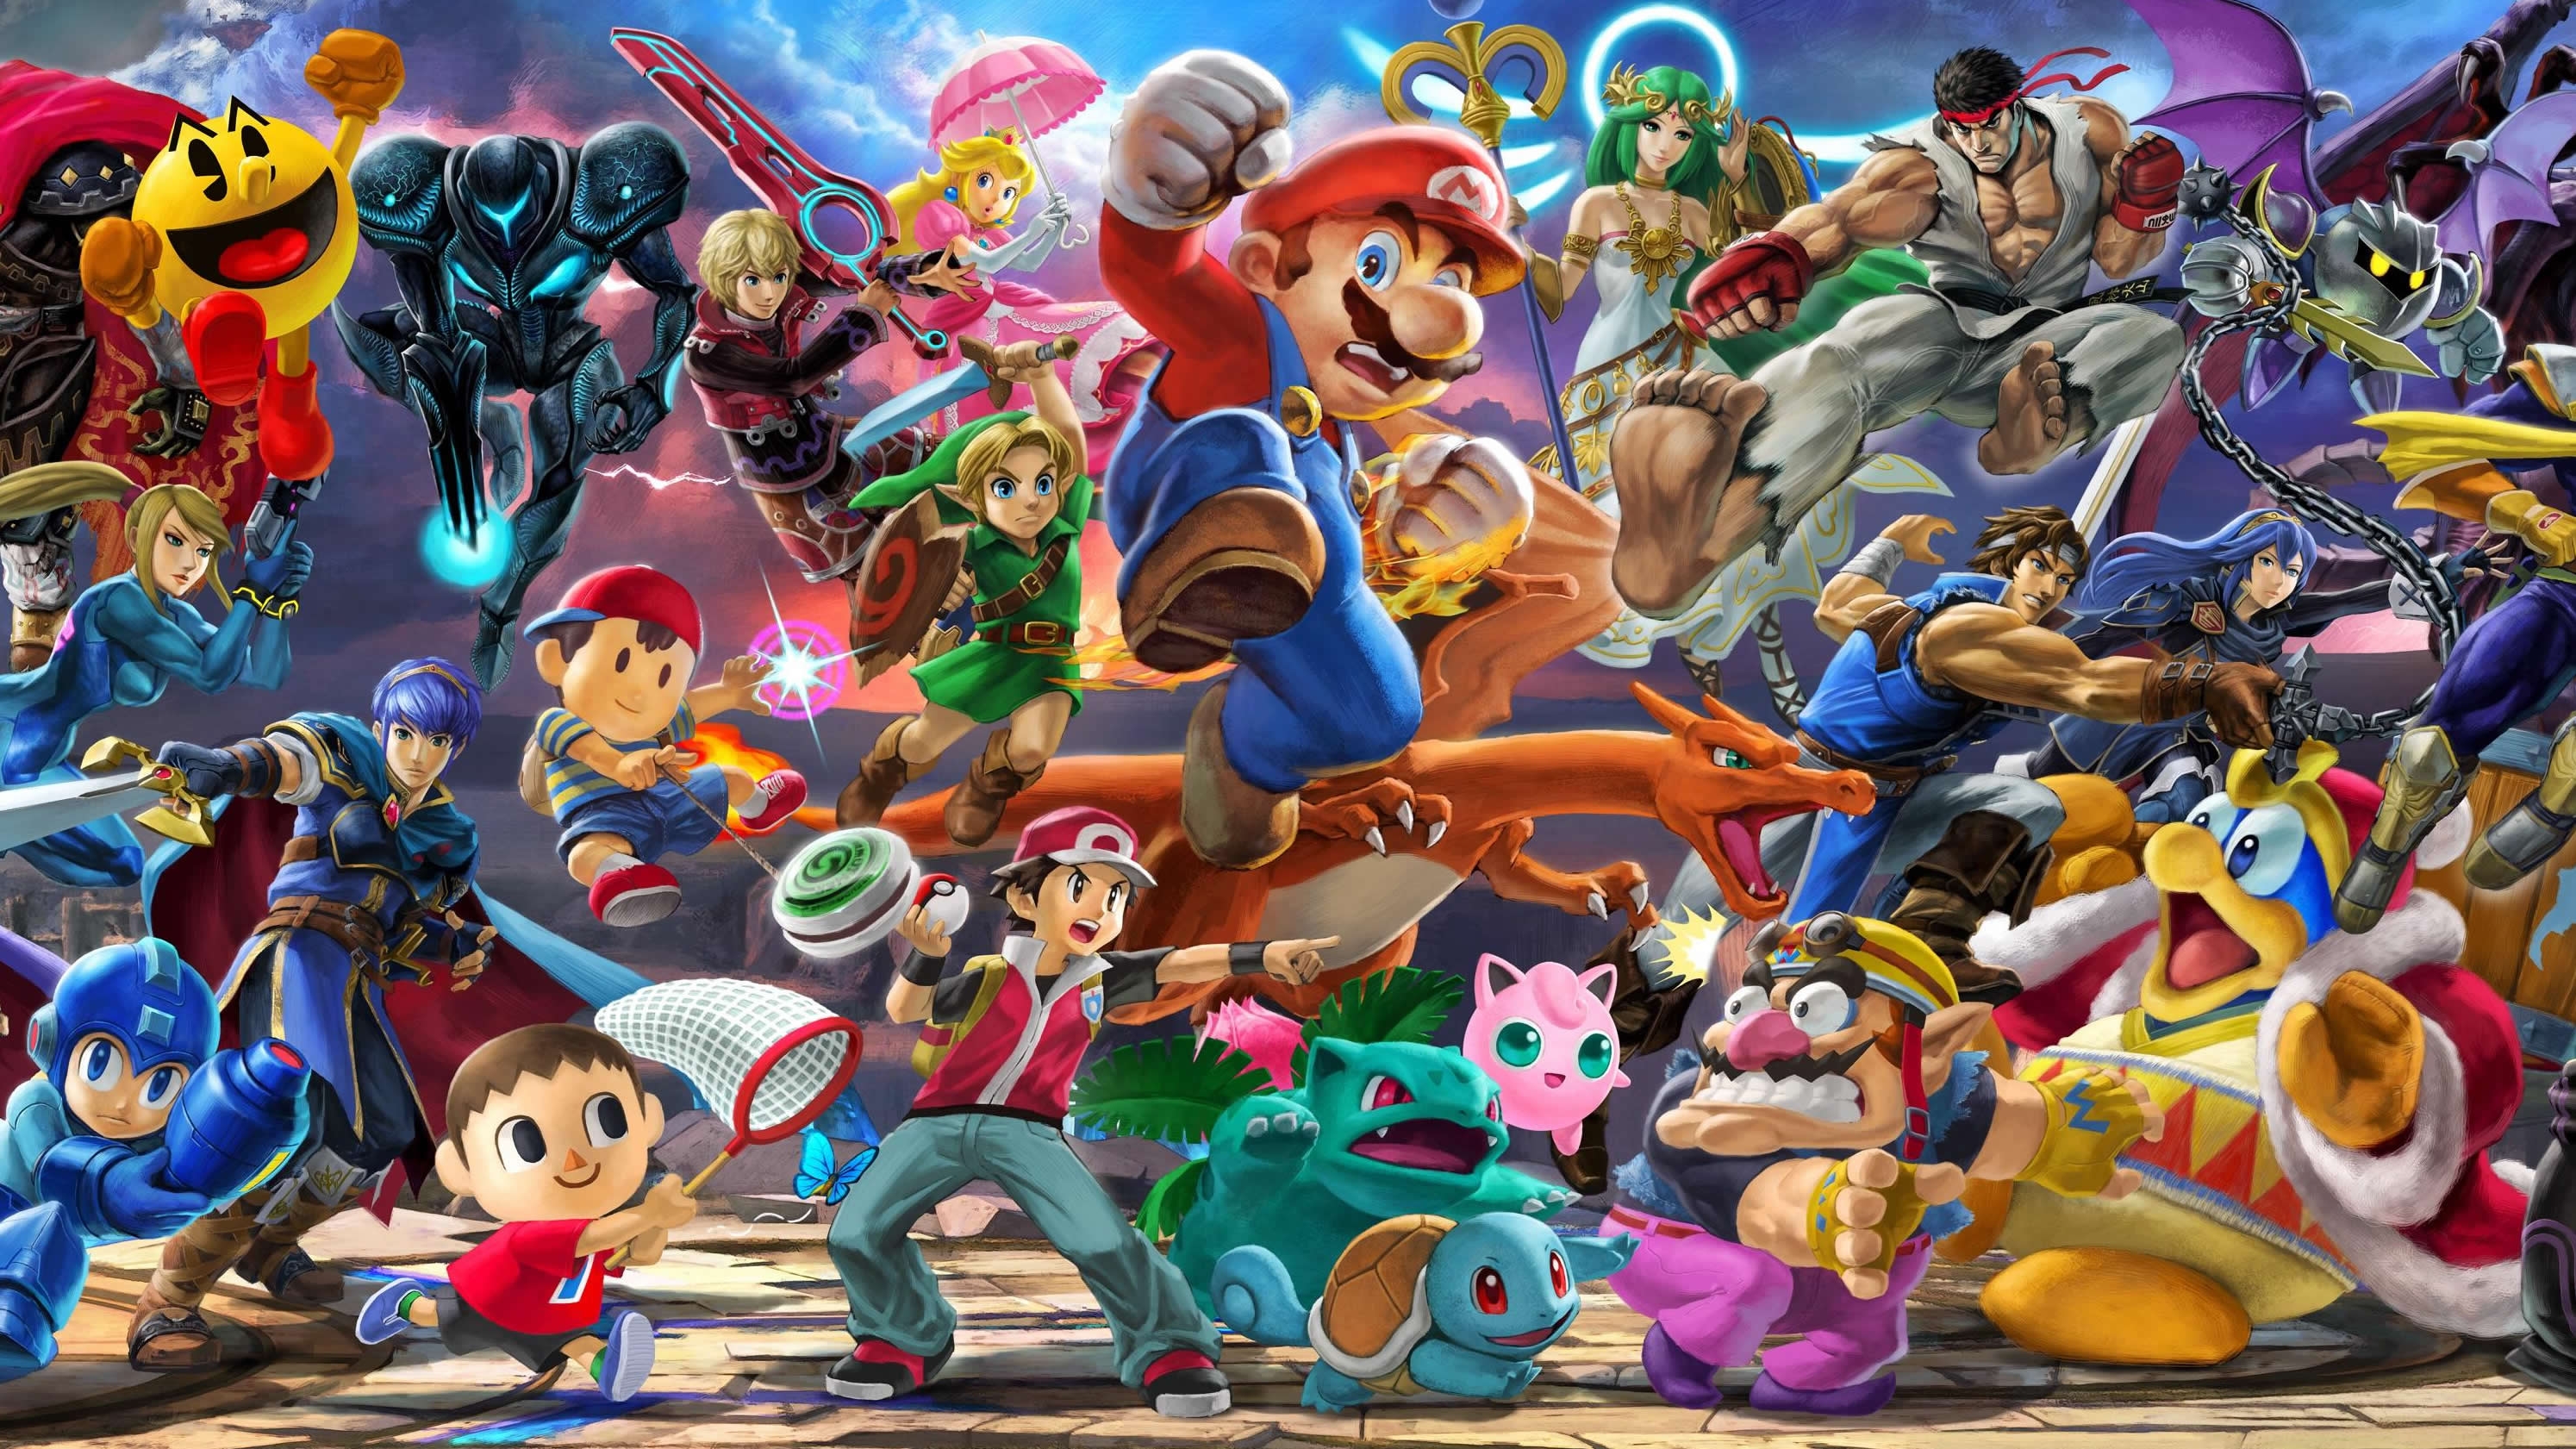 Nintendo just announced Switch OLED Super Smash Bros. Ultimate